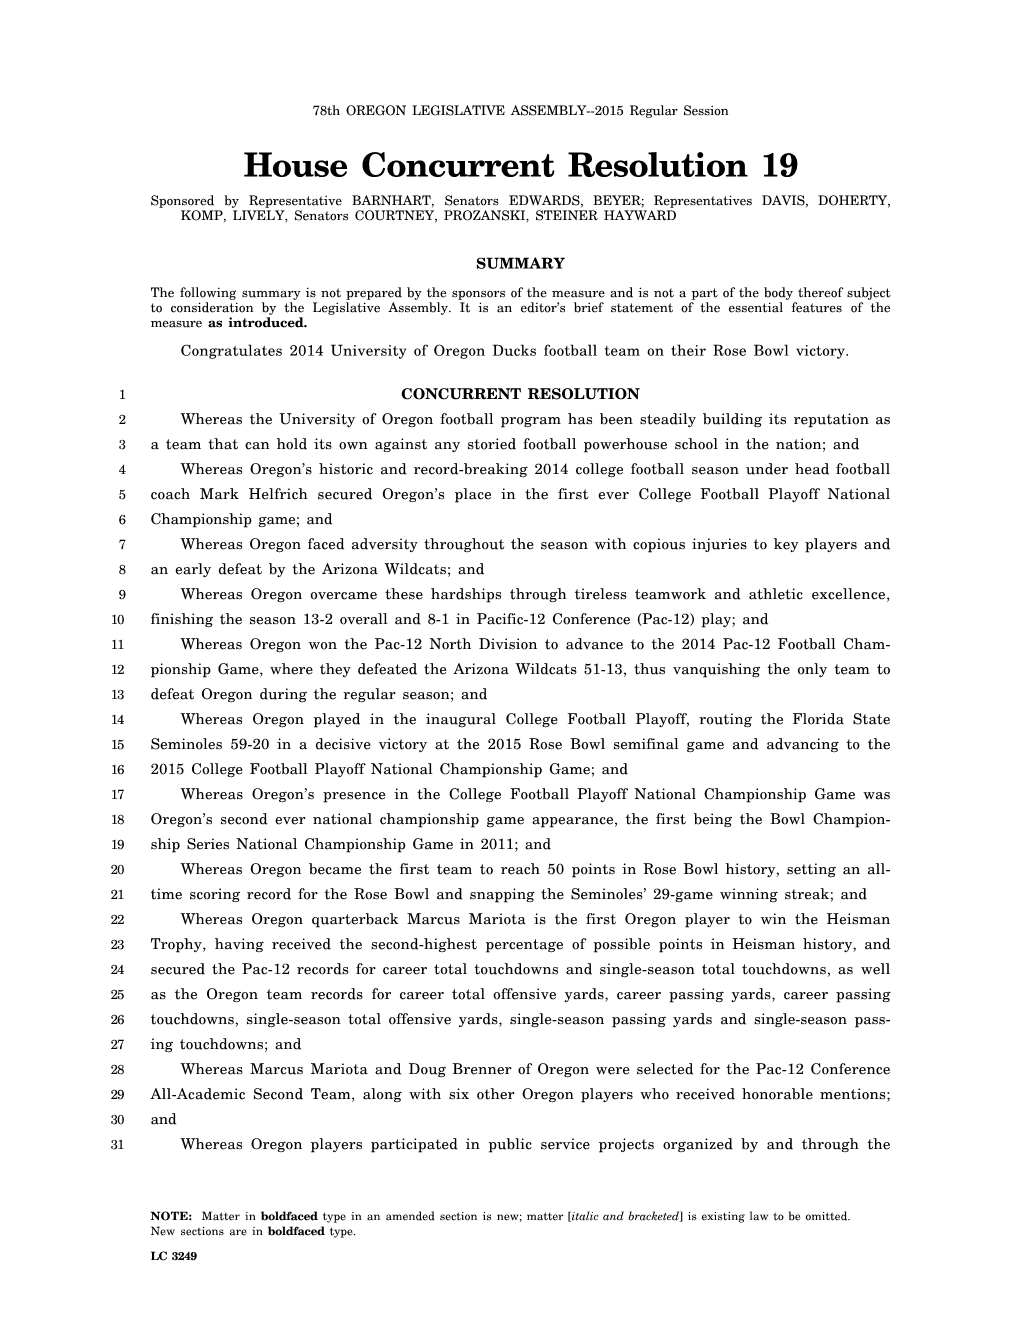 House Concurrent Resolution 19